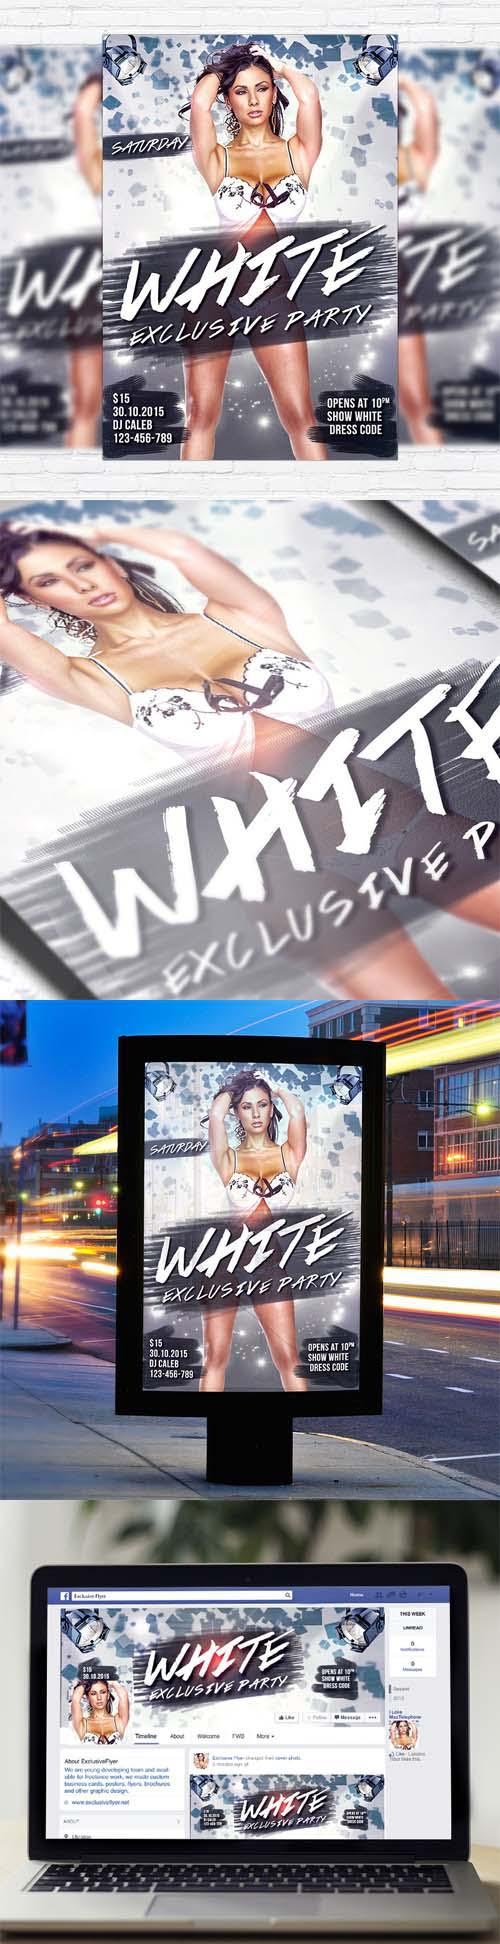 Flyer Template - White Exlusive Party + Facebook Cover